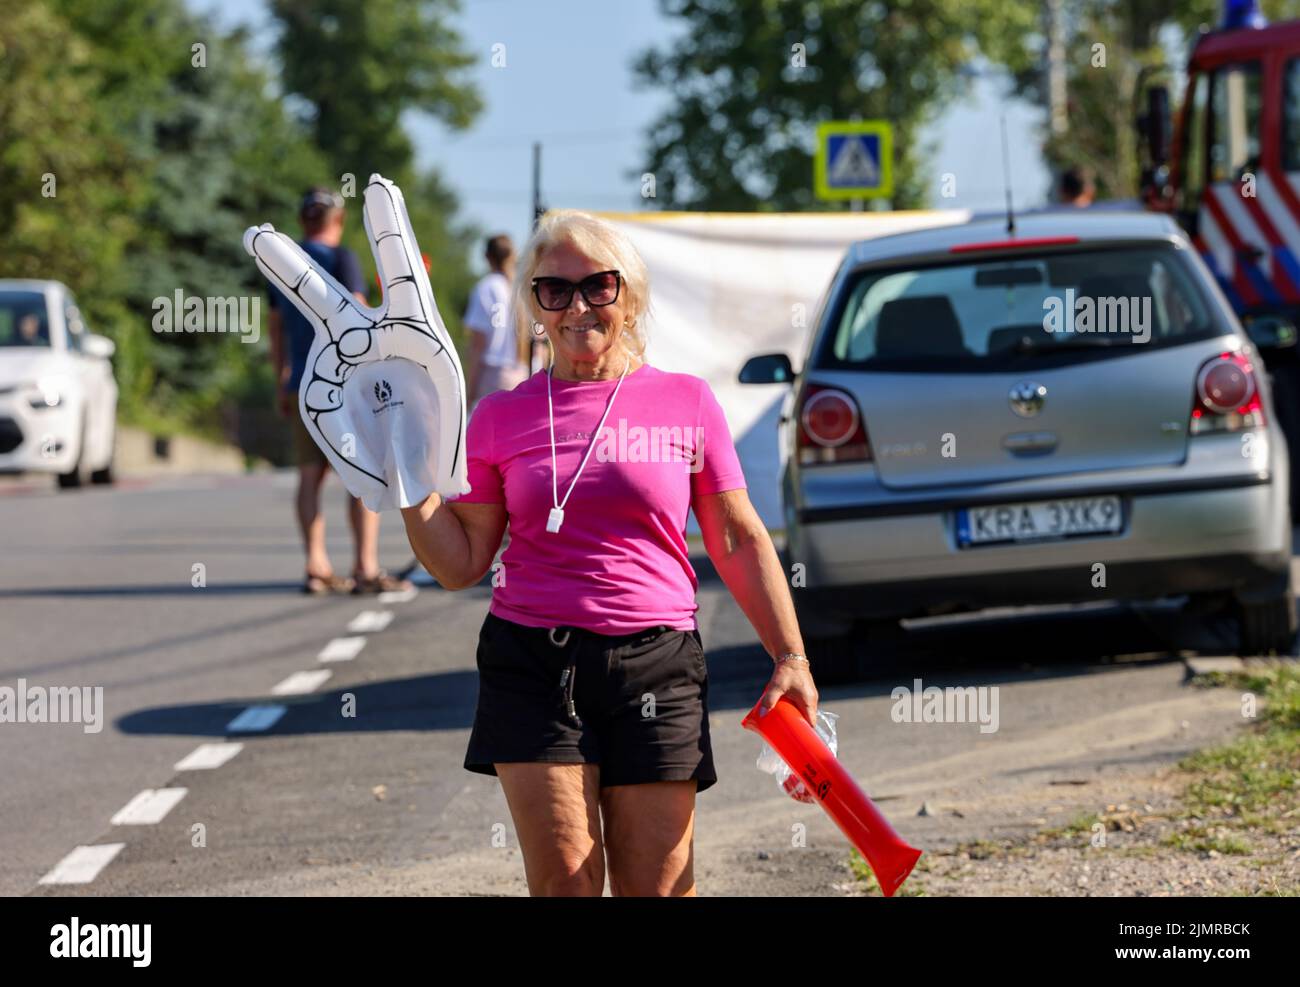 Krakow, Poland - August 5, 2022:  An elderly woman is cheering for the cyclists on the route of Tour de Pologne UCI – World Tour, stage 7 Skawina - Krakow. The biggest cycling event in Eastern Europe. Stock Photo